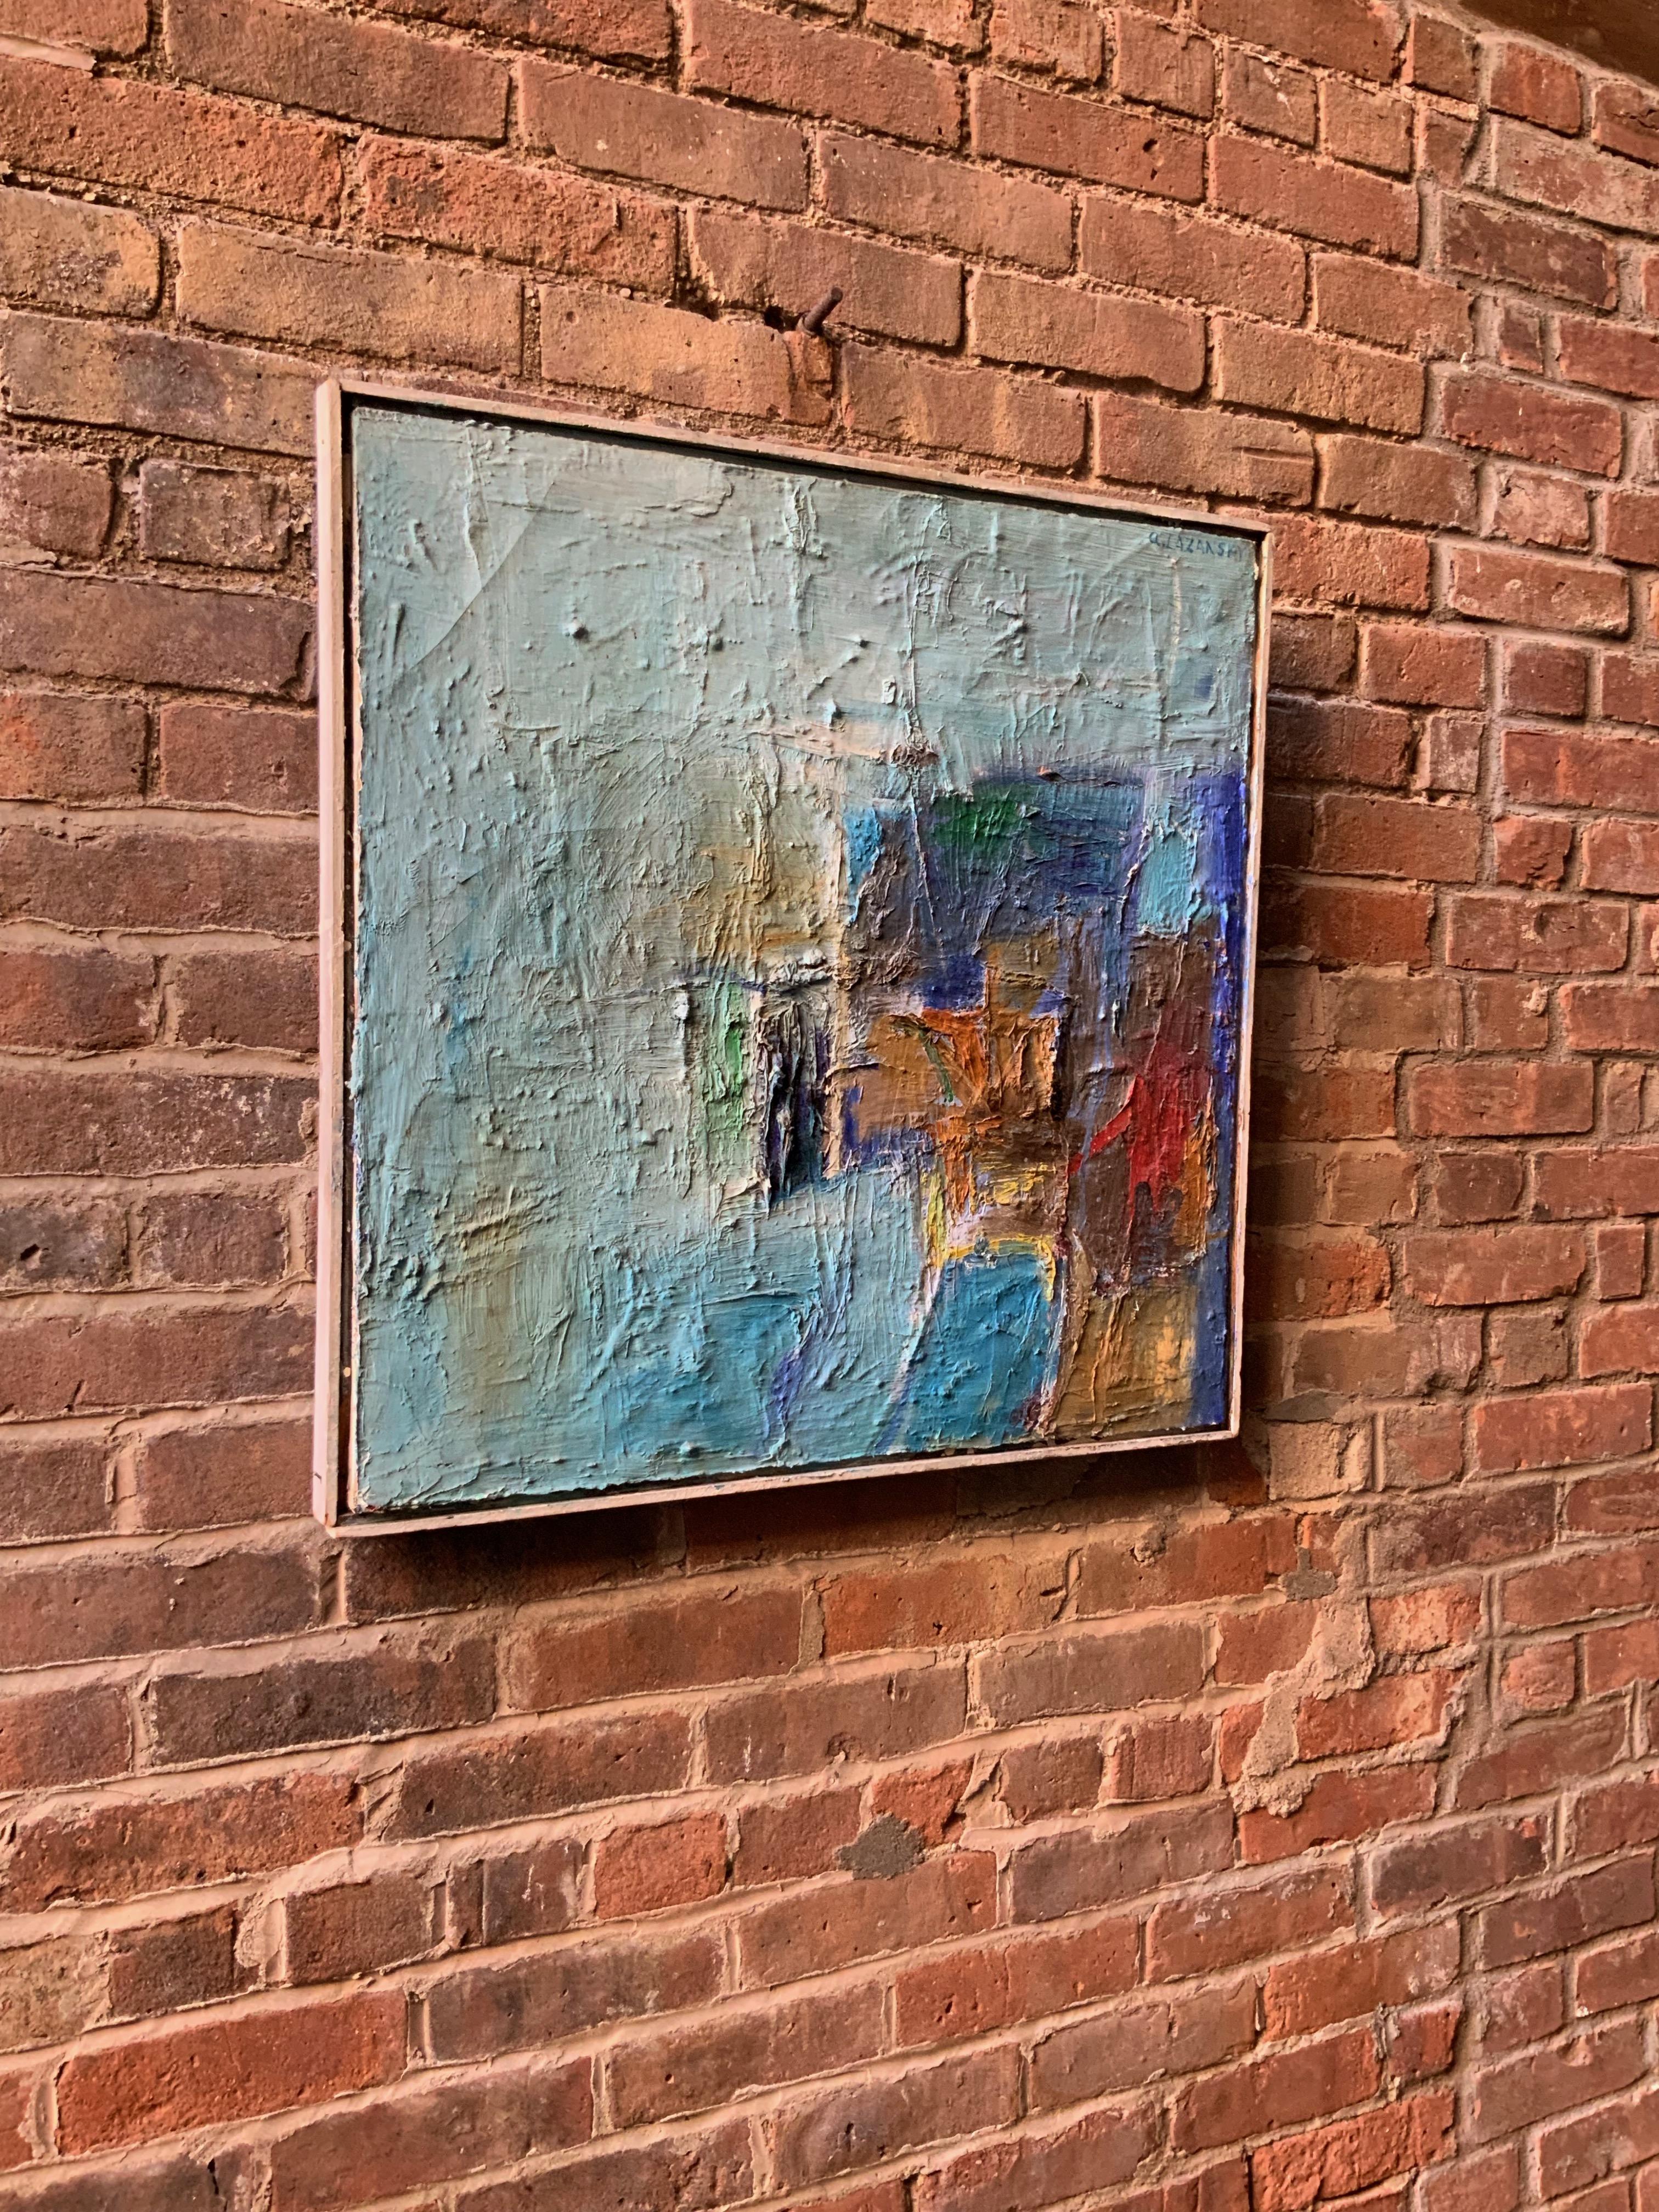 Signed A. Lazansky upper right. Heavy expressive impasto textured build up of paint surface. Oil paint on stretched canvas, circa 1950-1960. Framing treatment consists of white painted profile molding. Good condition with some cracking of surface